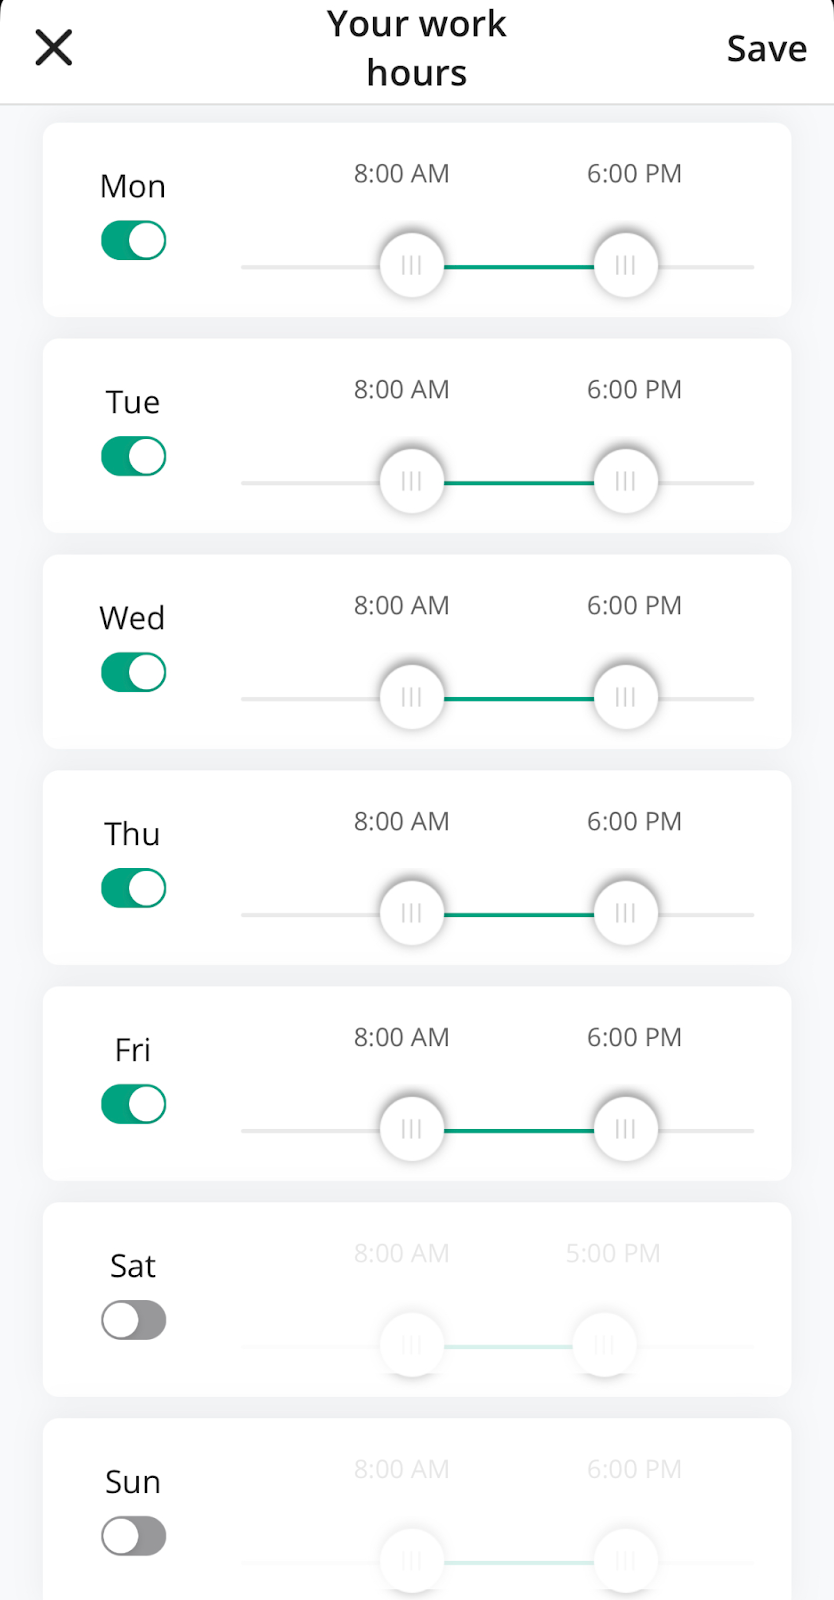 Work hours settings - days